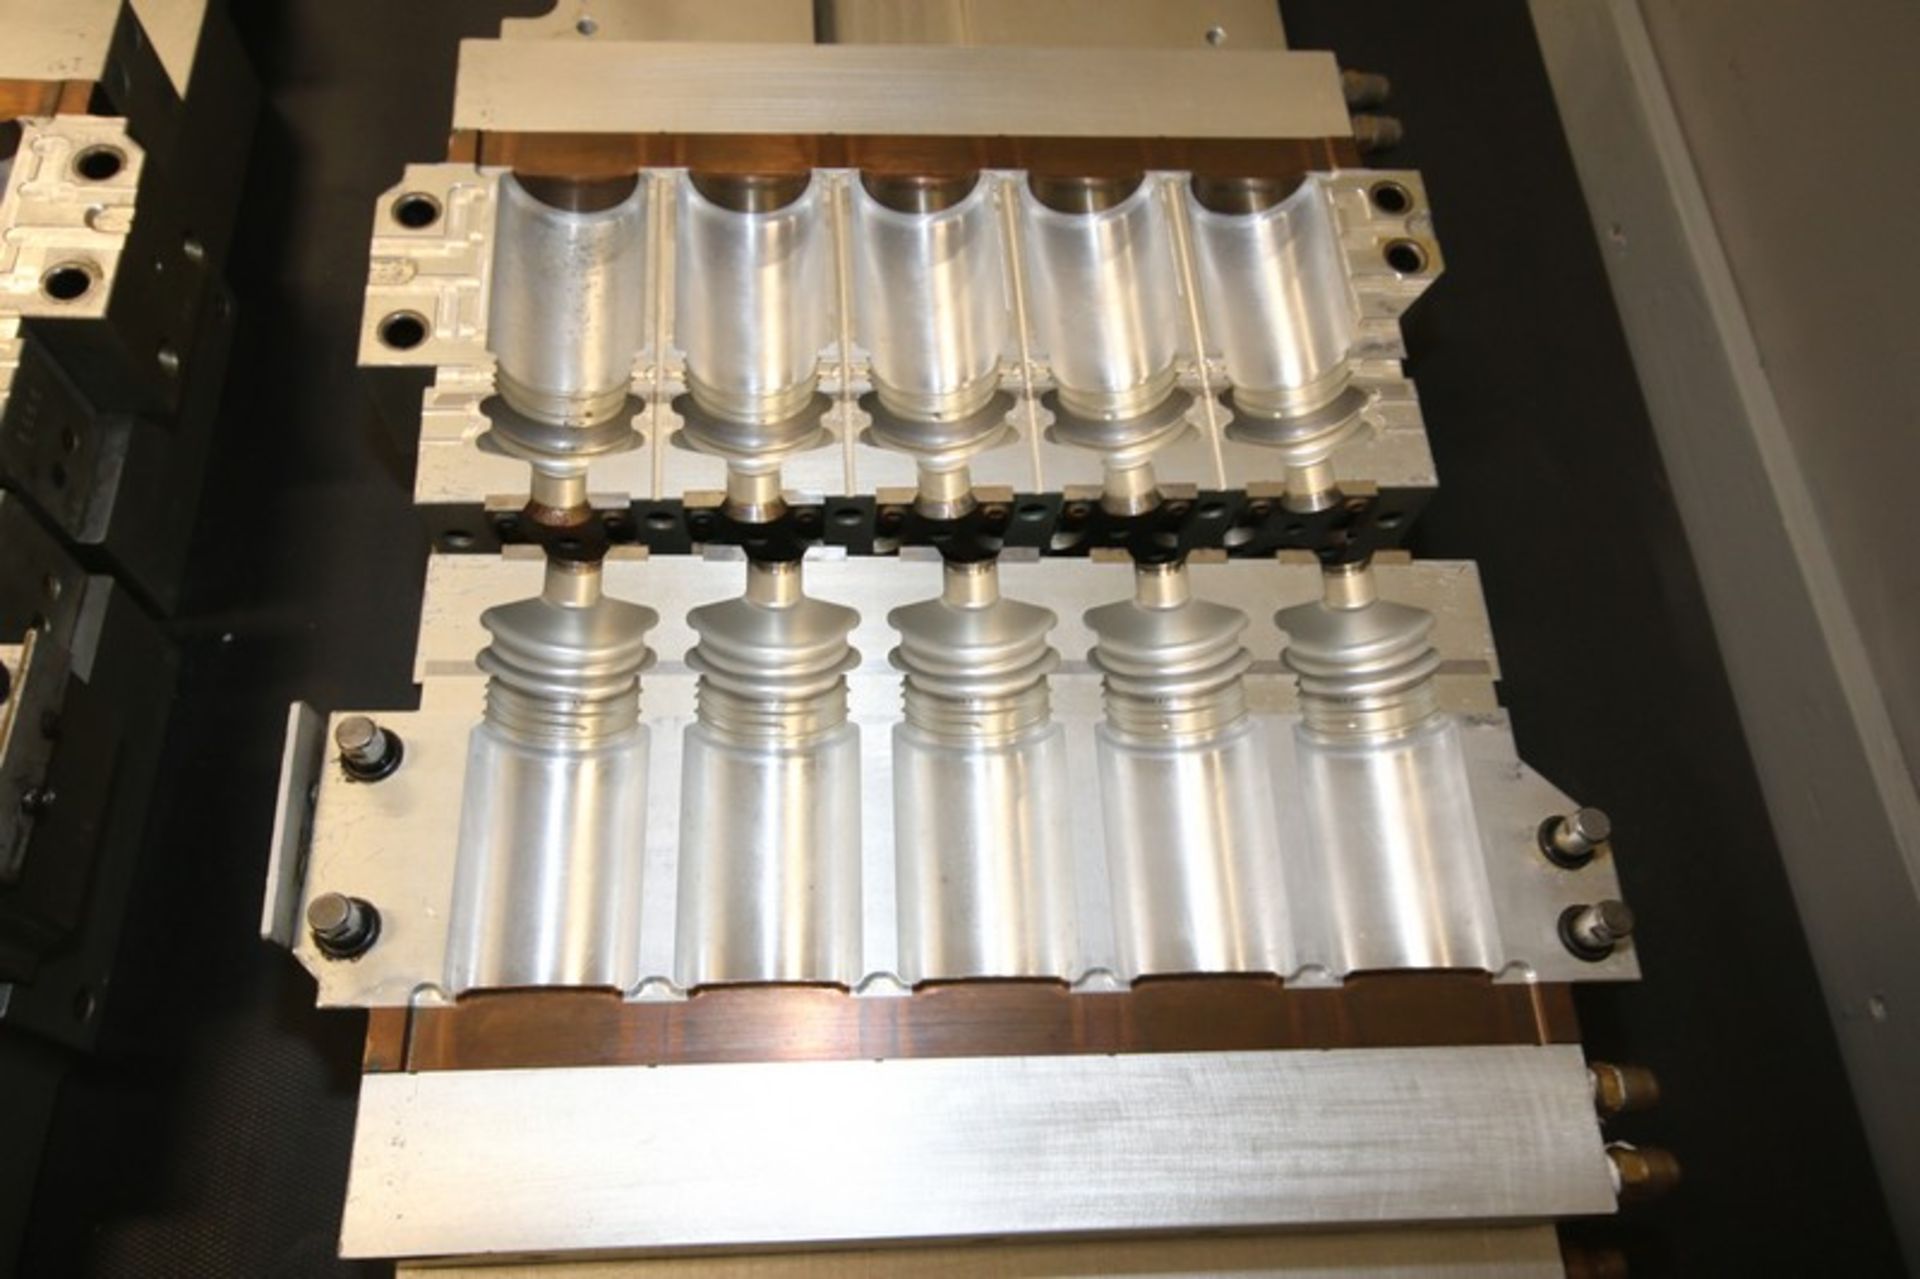 Compact 5-Wide S/S Bottle Molds, S/N 905.851.7724/859.371.3250, Overall Dims.: Aprox. 18-1/4" L x - Bild 6 aus 9